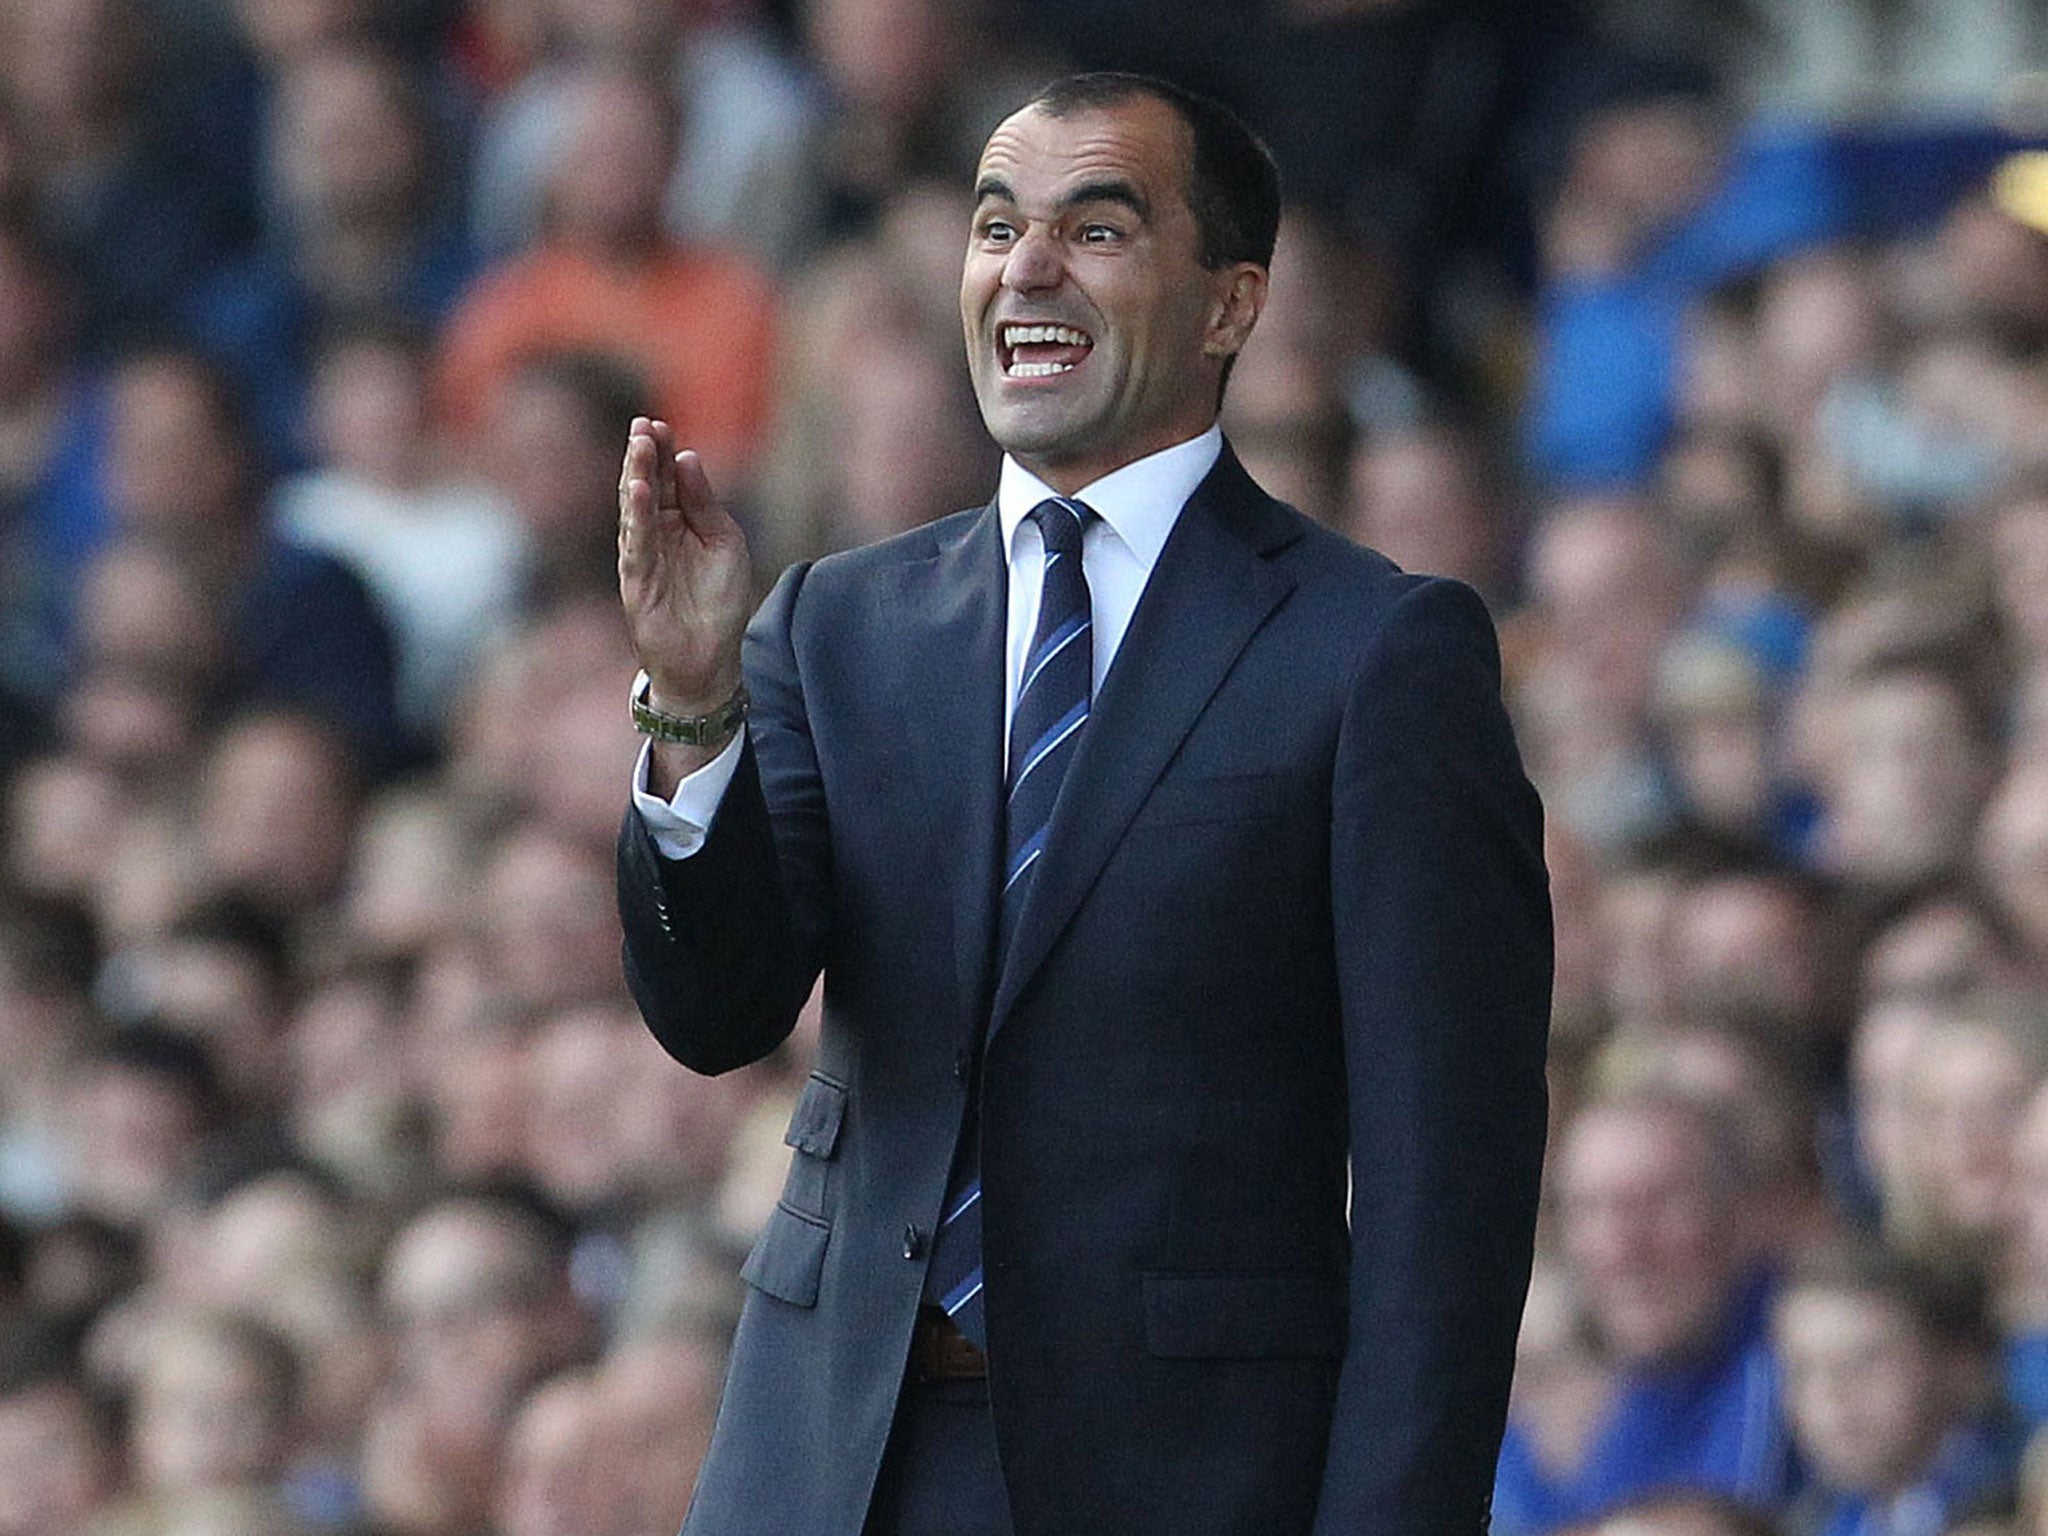 Roberto Martinez remonstrates on the sideline during Everton's 3-2 defeat to Crystal Palace